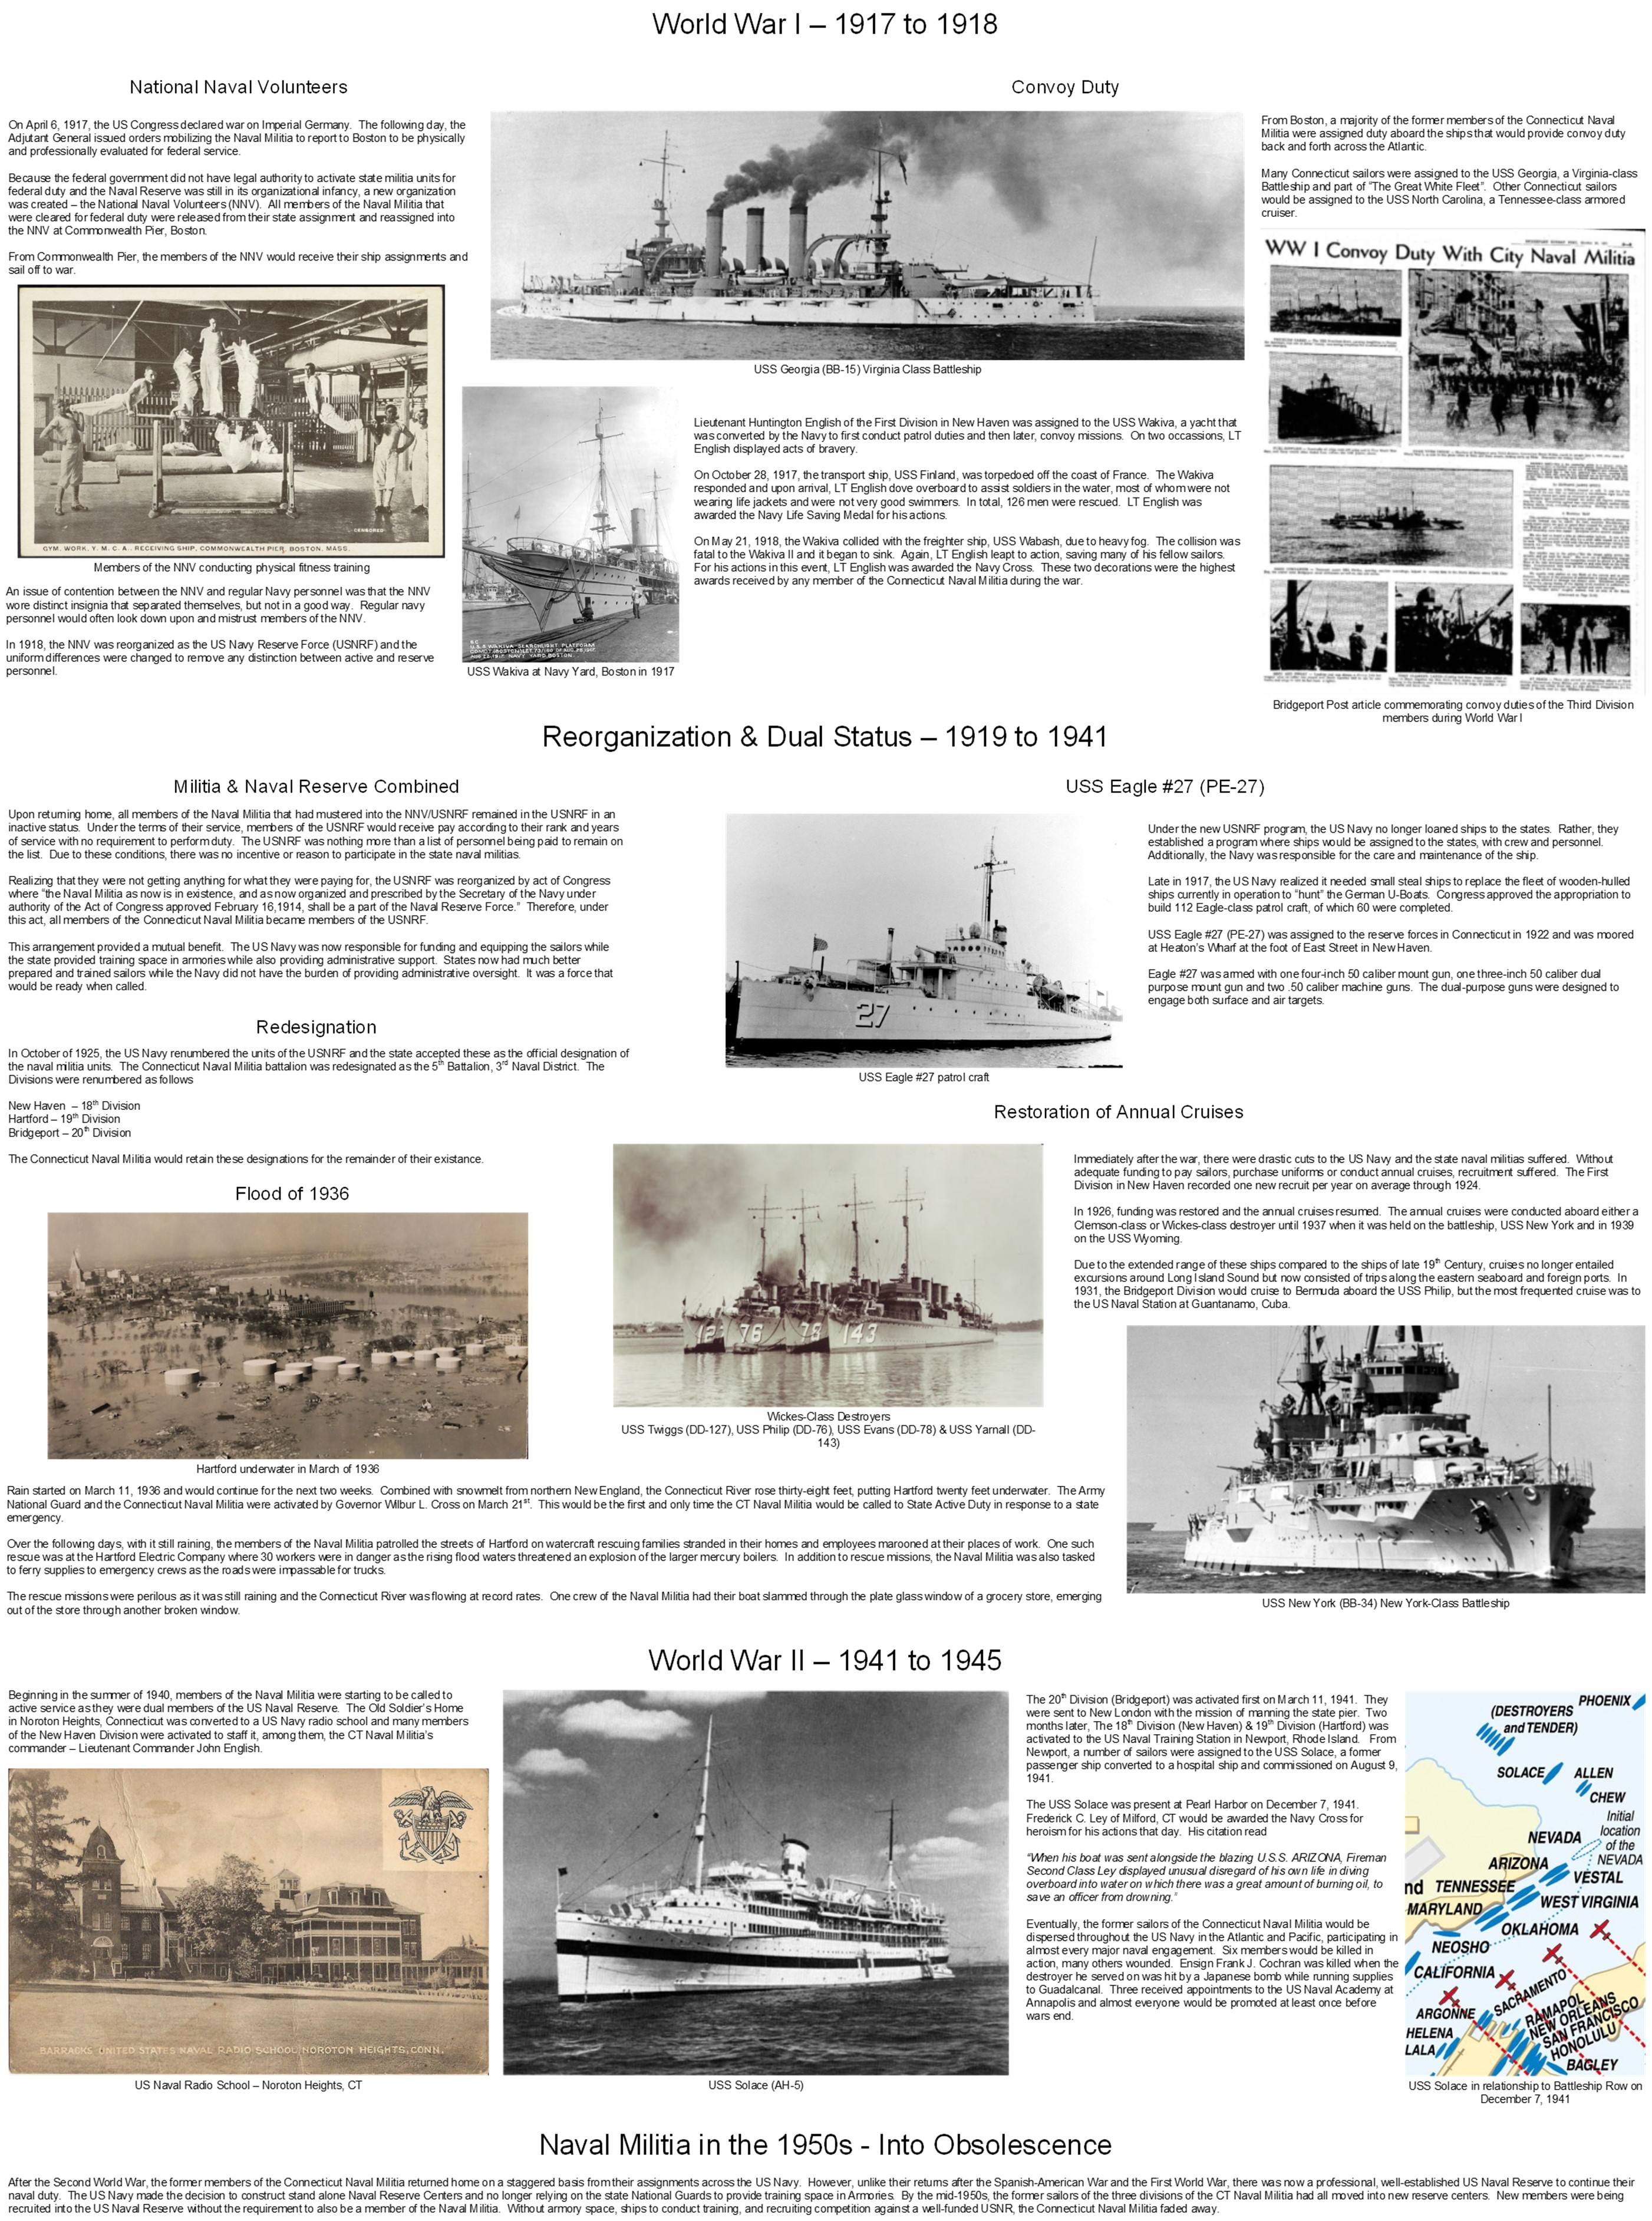 History of the Naval Militia